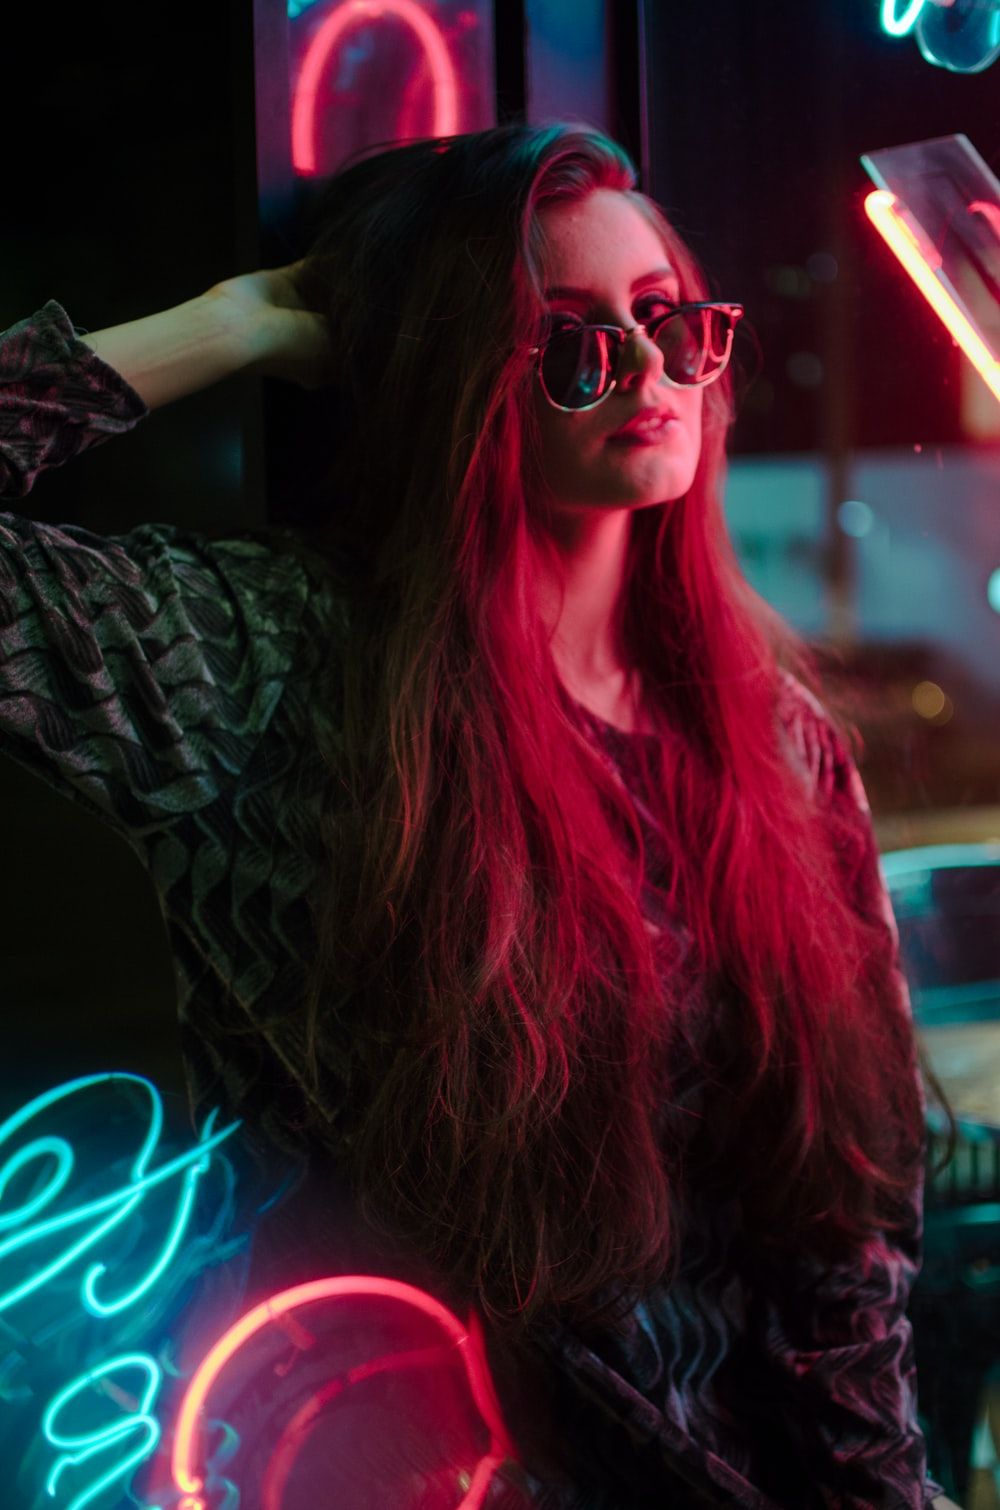 Neon Girl Picture. Download Free Image